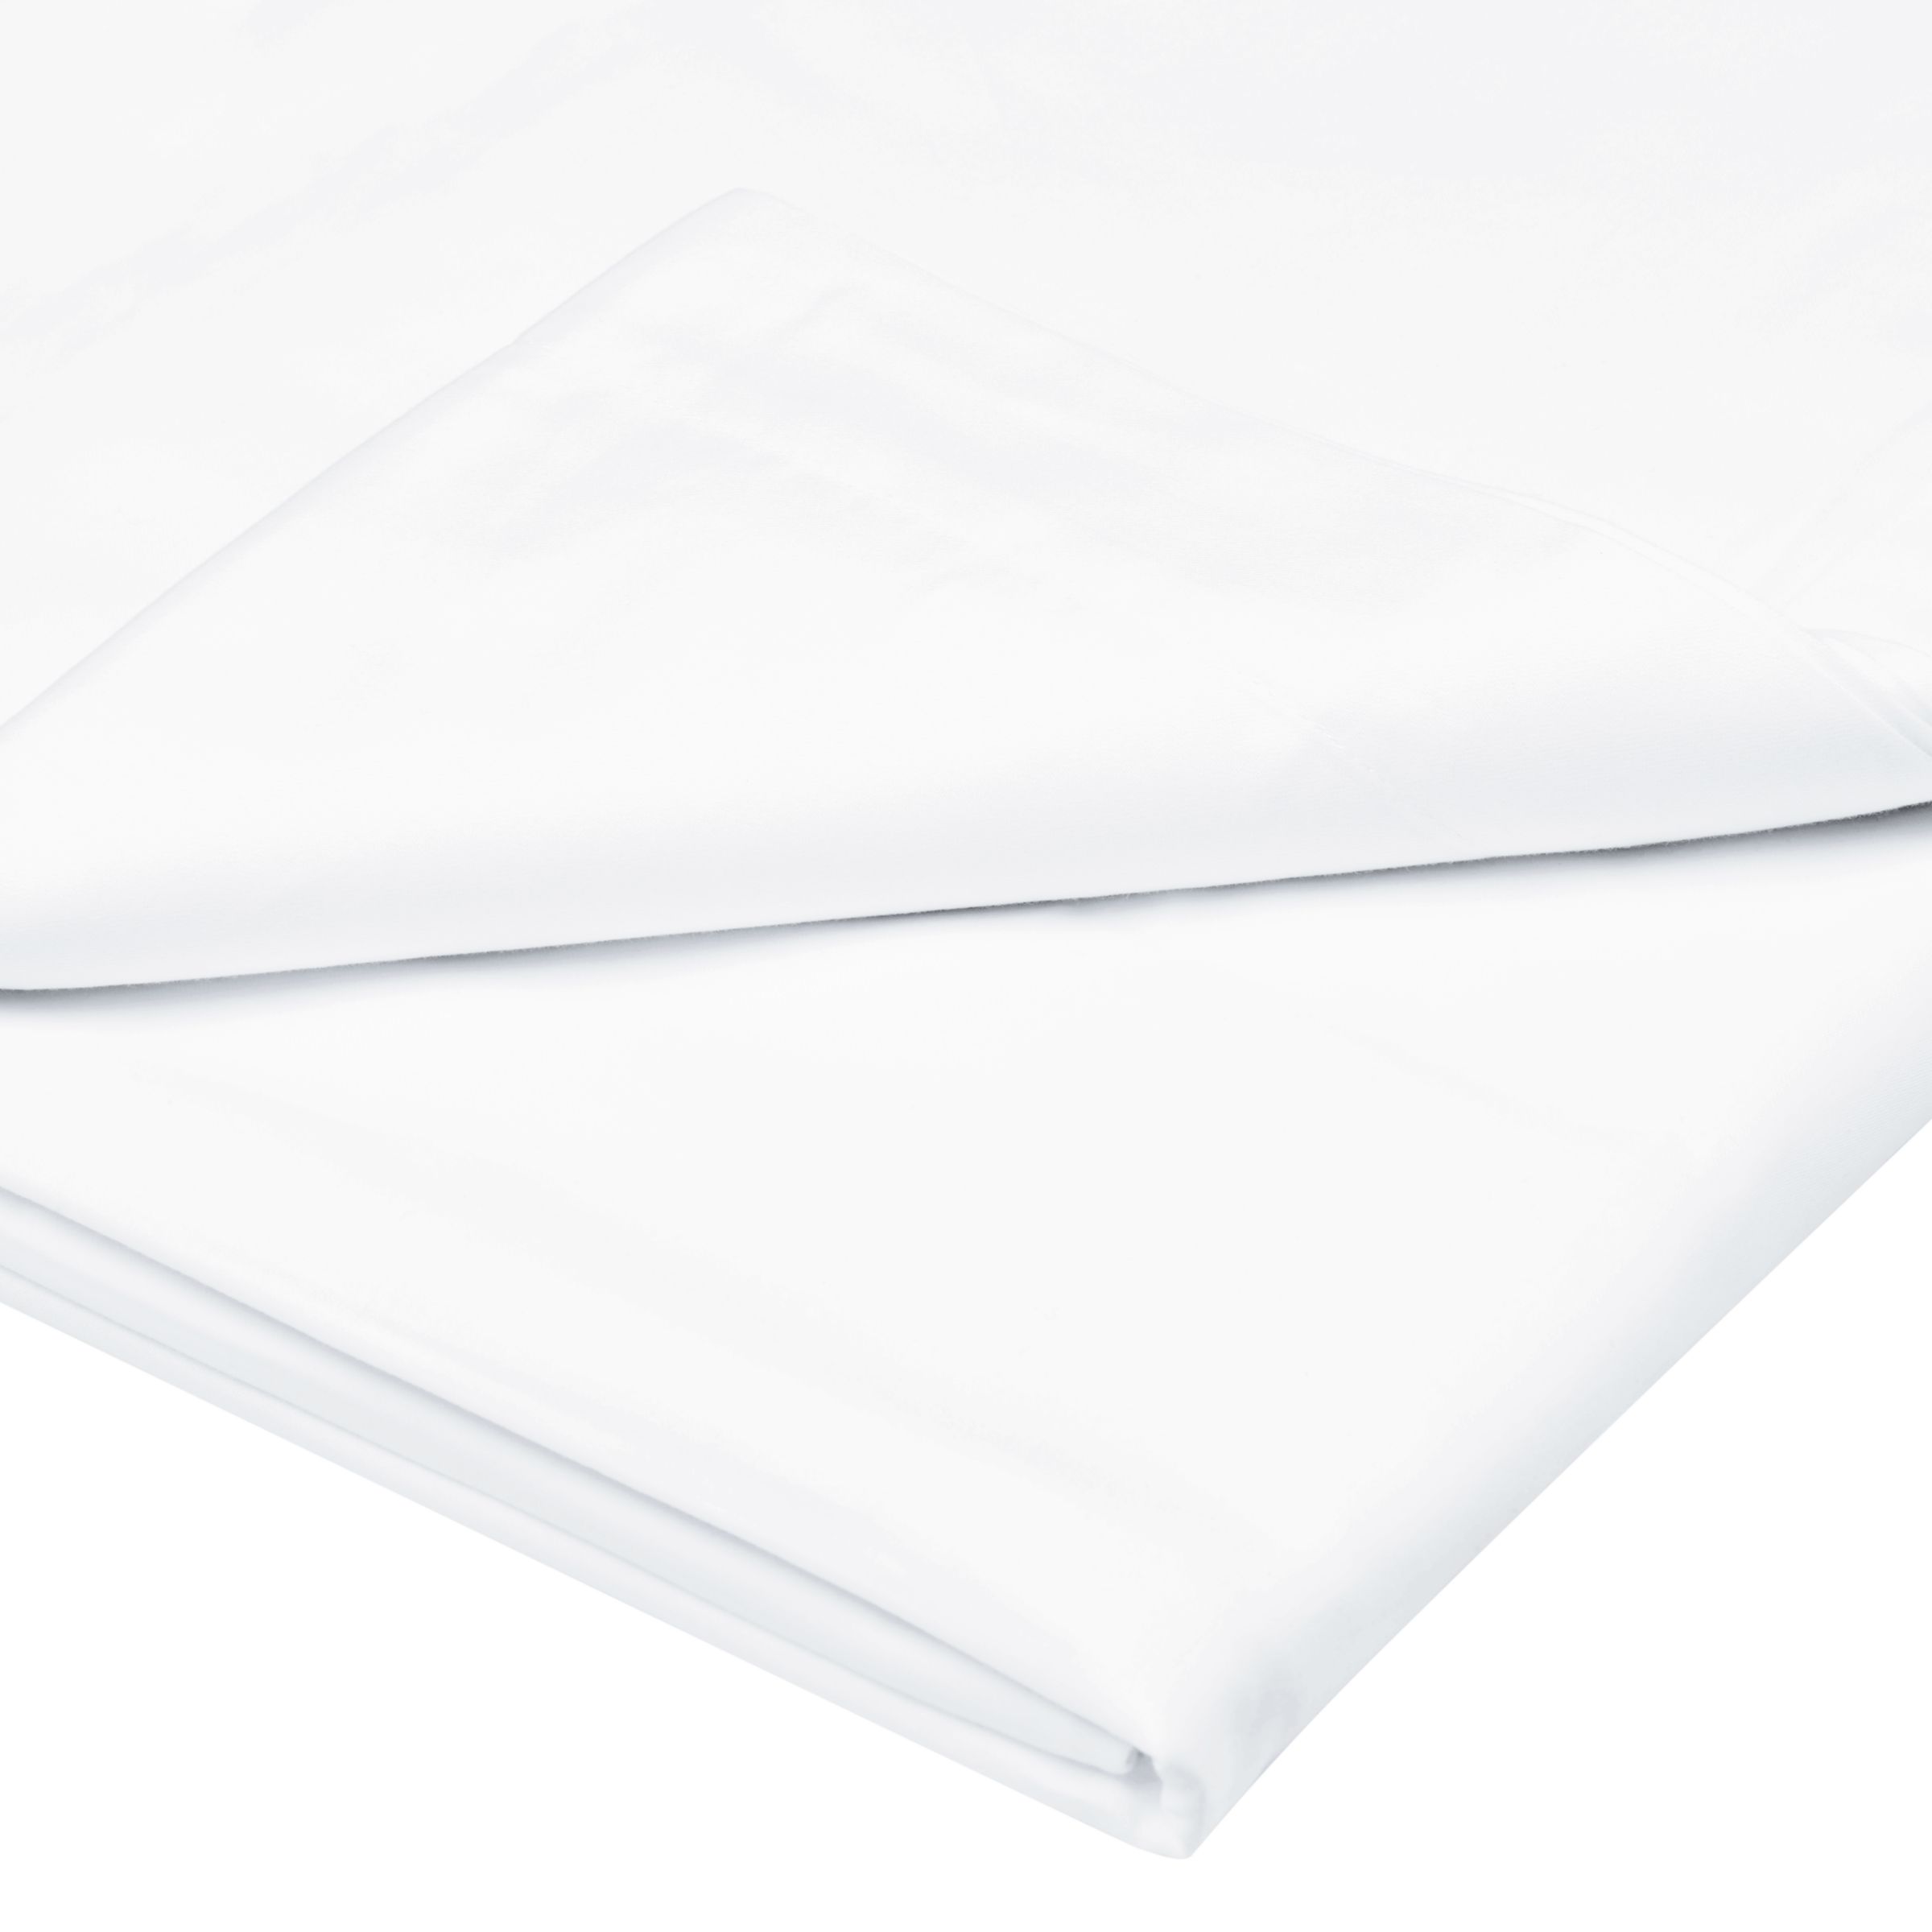 John Lewis & Partners Soft & Silky Egyptian Cotton 800 Thread Count Flat Sheet, Pale Blue